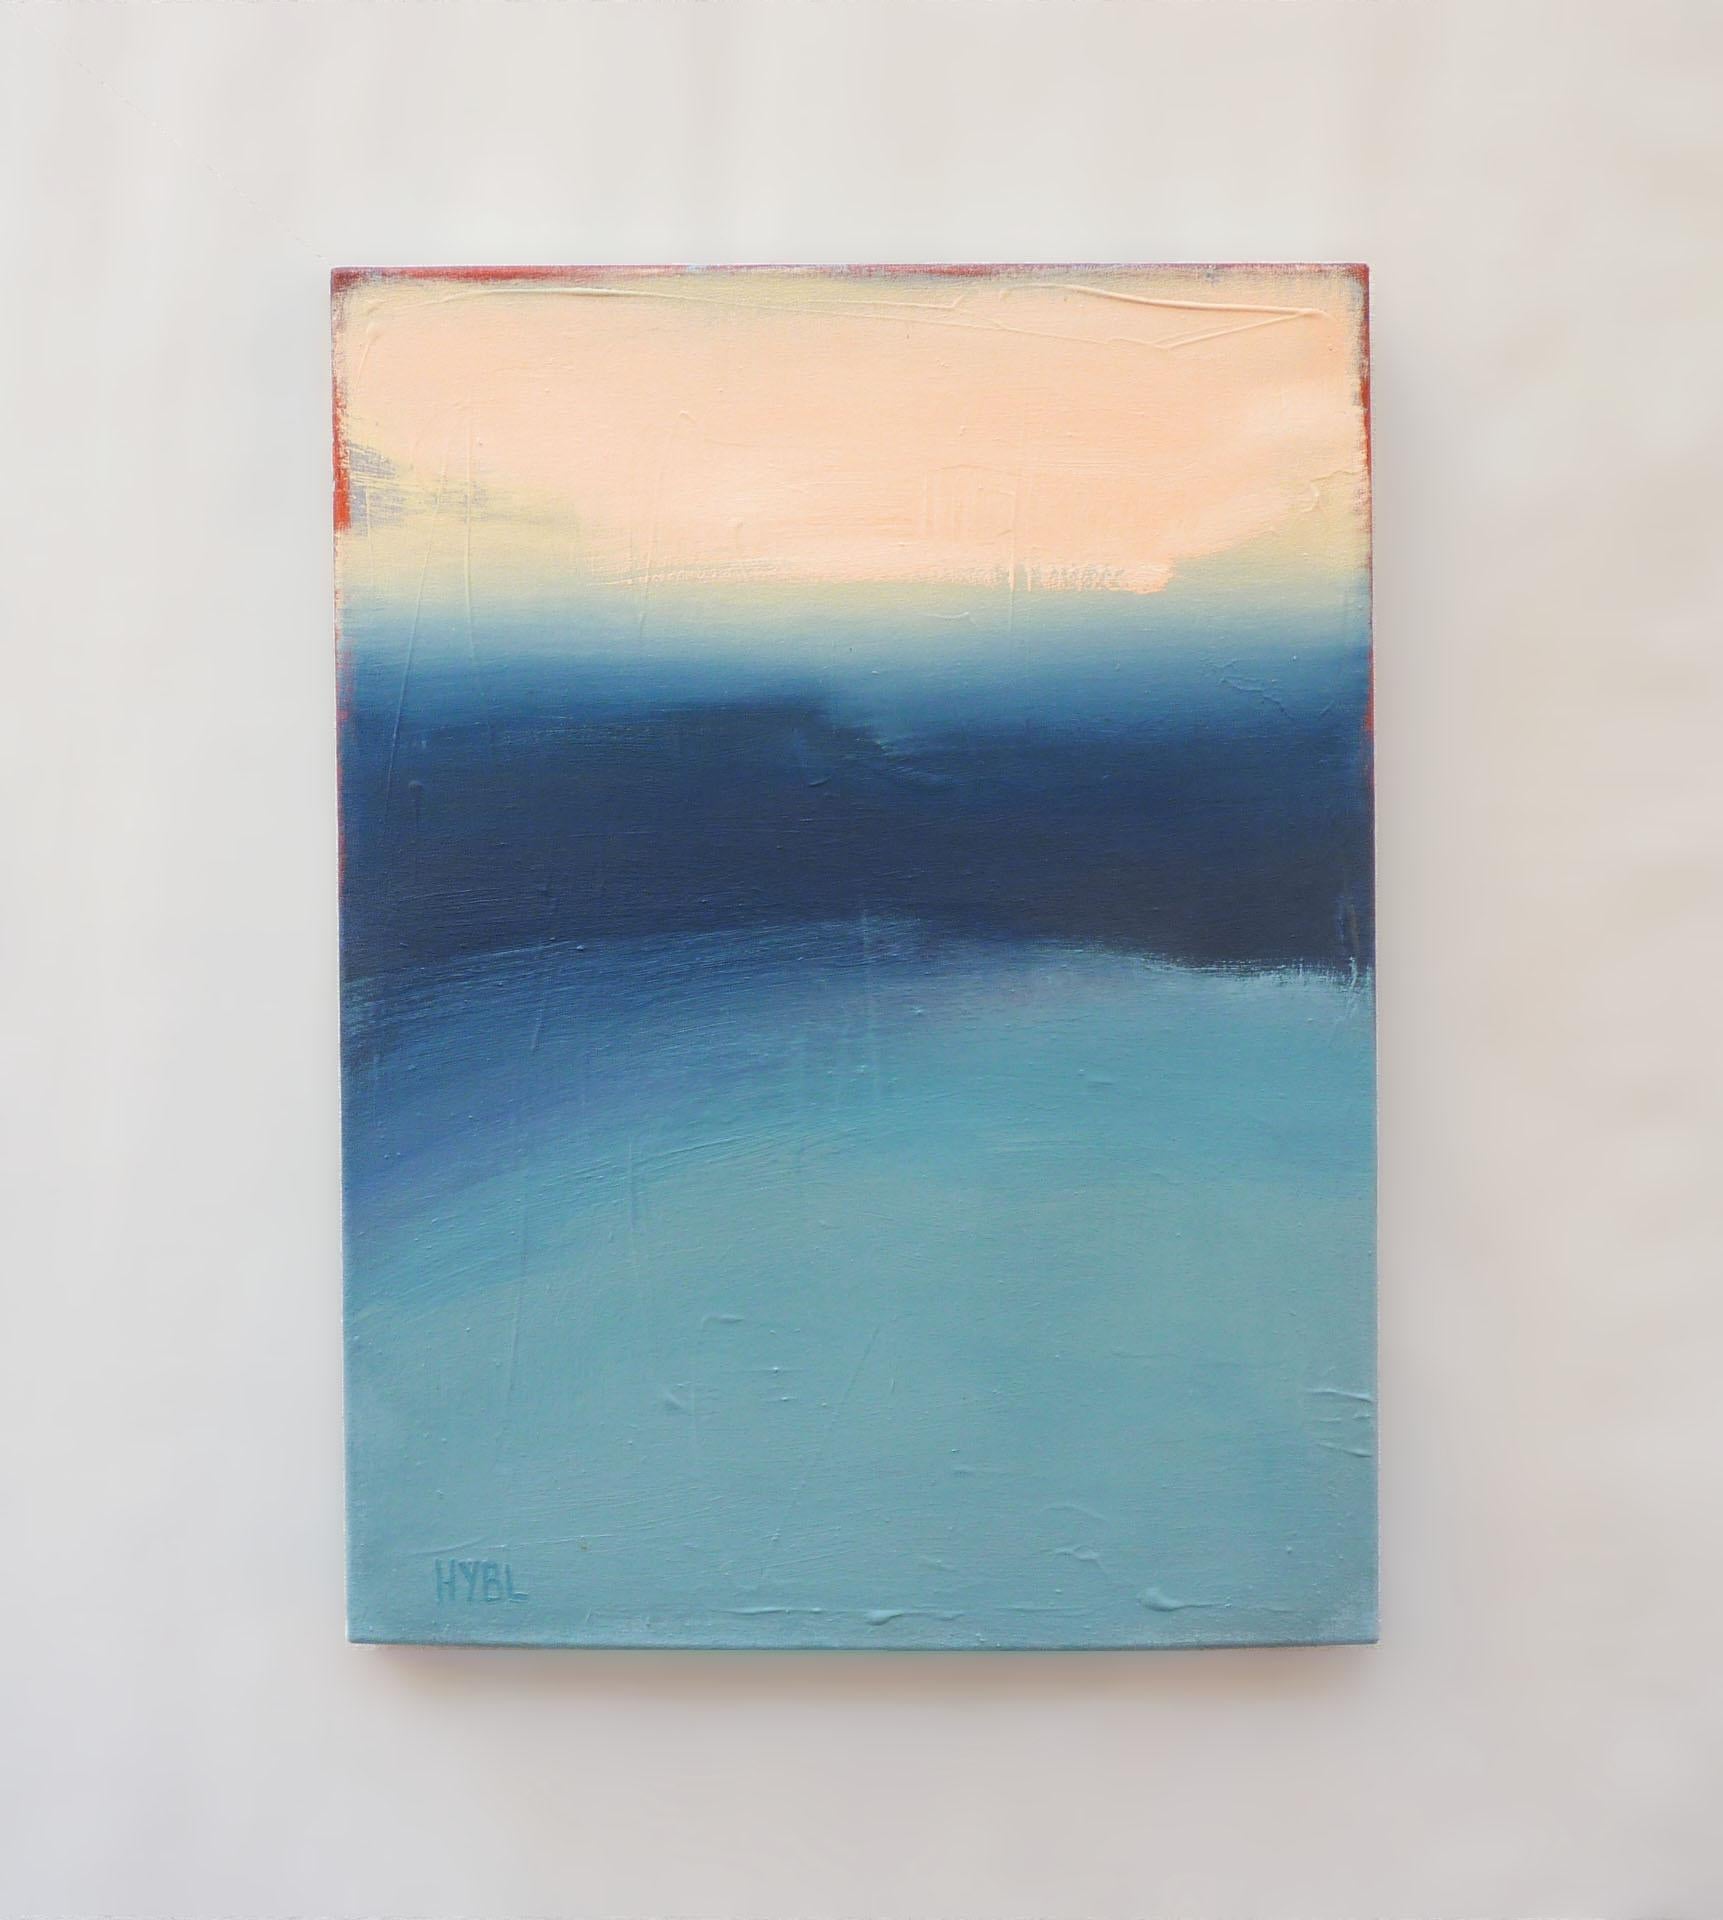 <p>Artist Comments<br>Artist Heidi Hybl paints an abstract seascape in a state of placidity. Hailing from the Big Sur Coast of California, she draws inspiration from the vast body of water. Heidi displays an interplay of the soft indistinct horizon